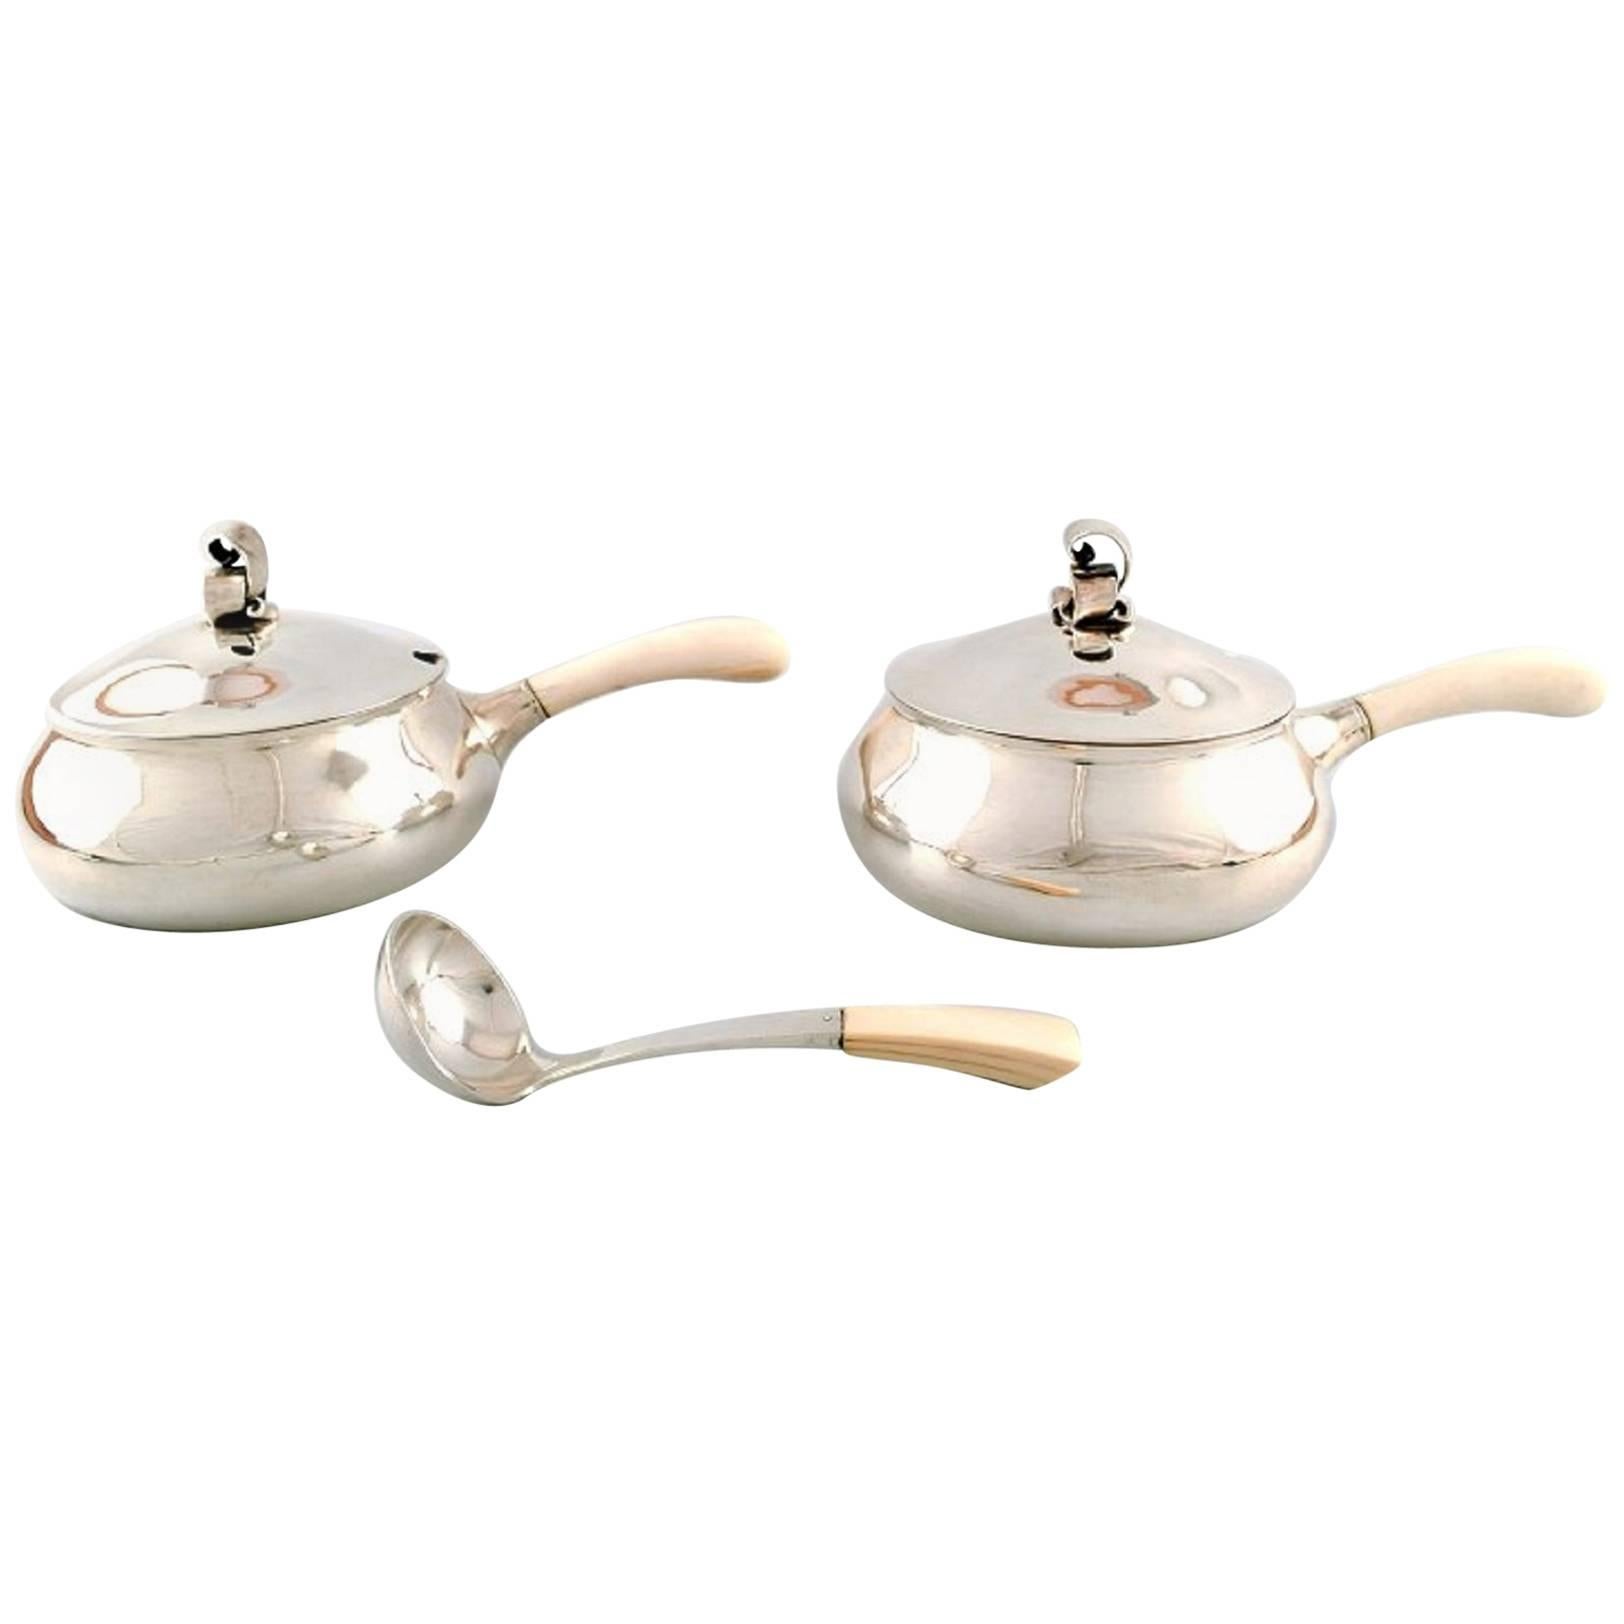 Evald Nielsen a Pair of Serving Bowls with Cover and a Sauce Ladle